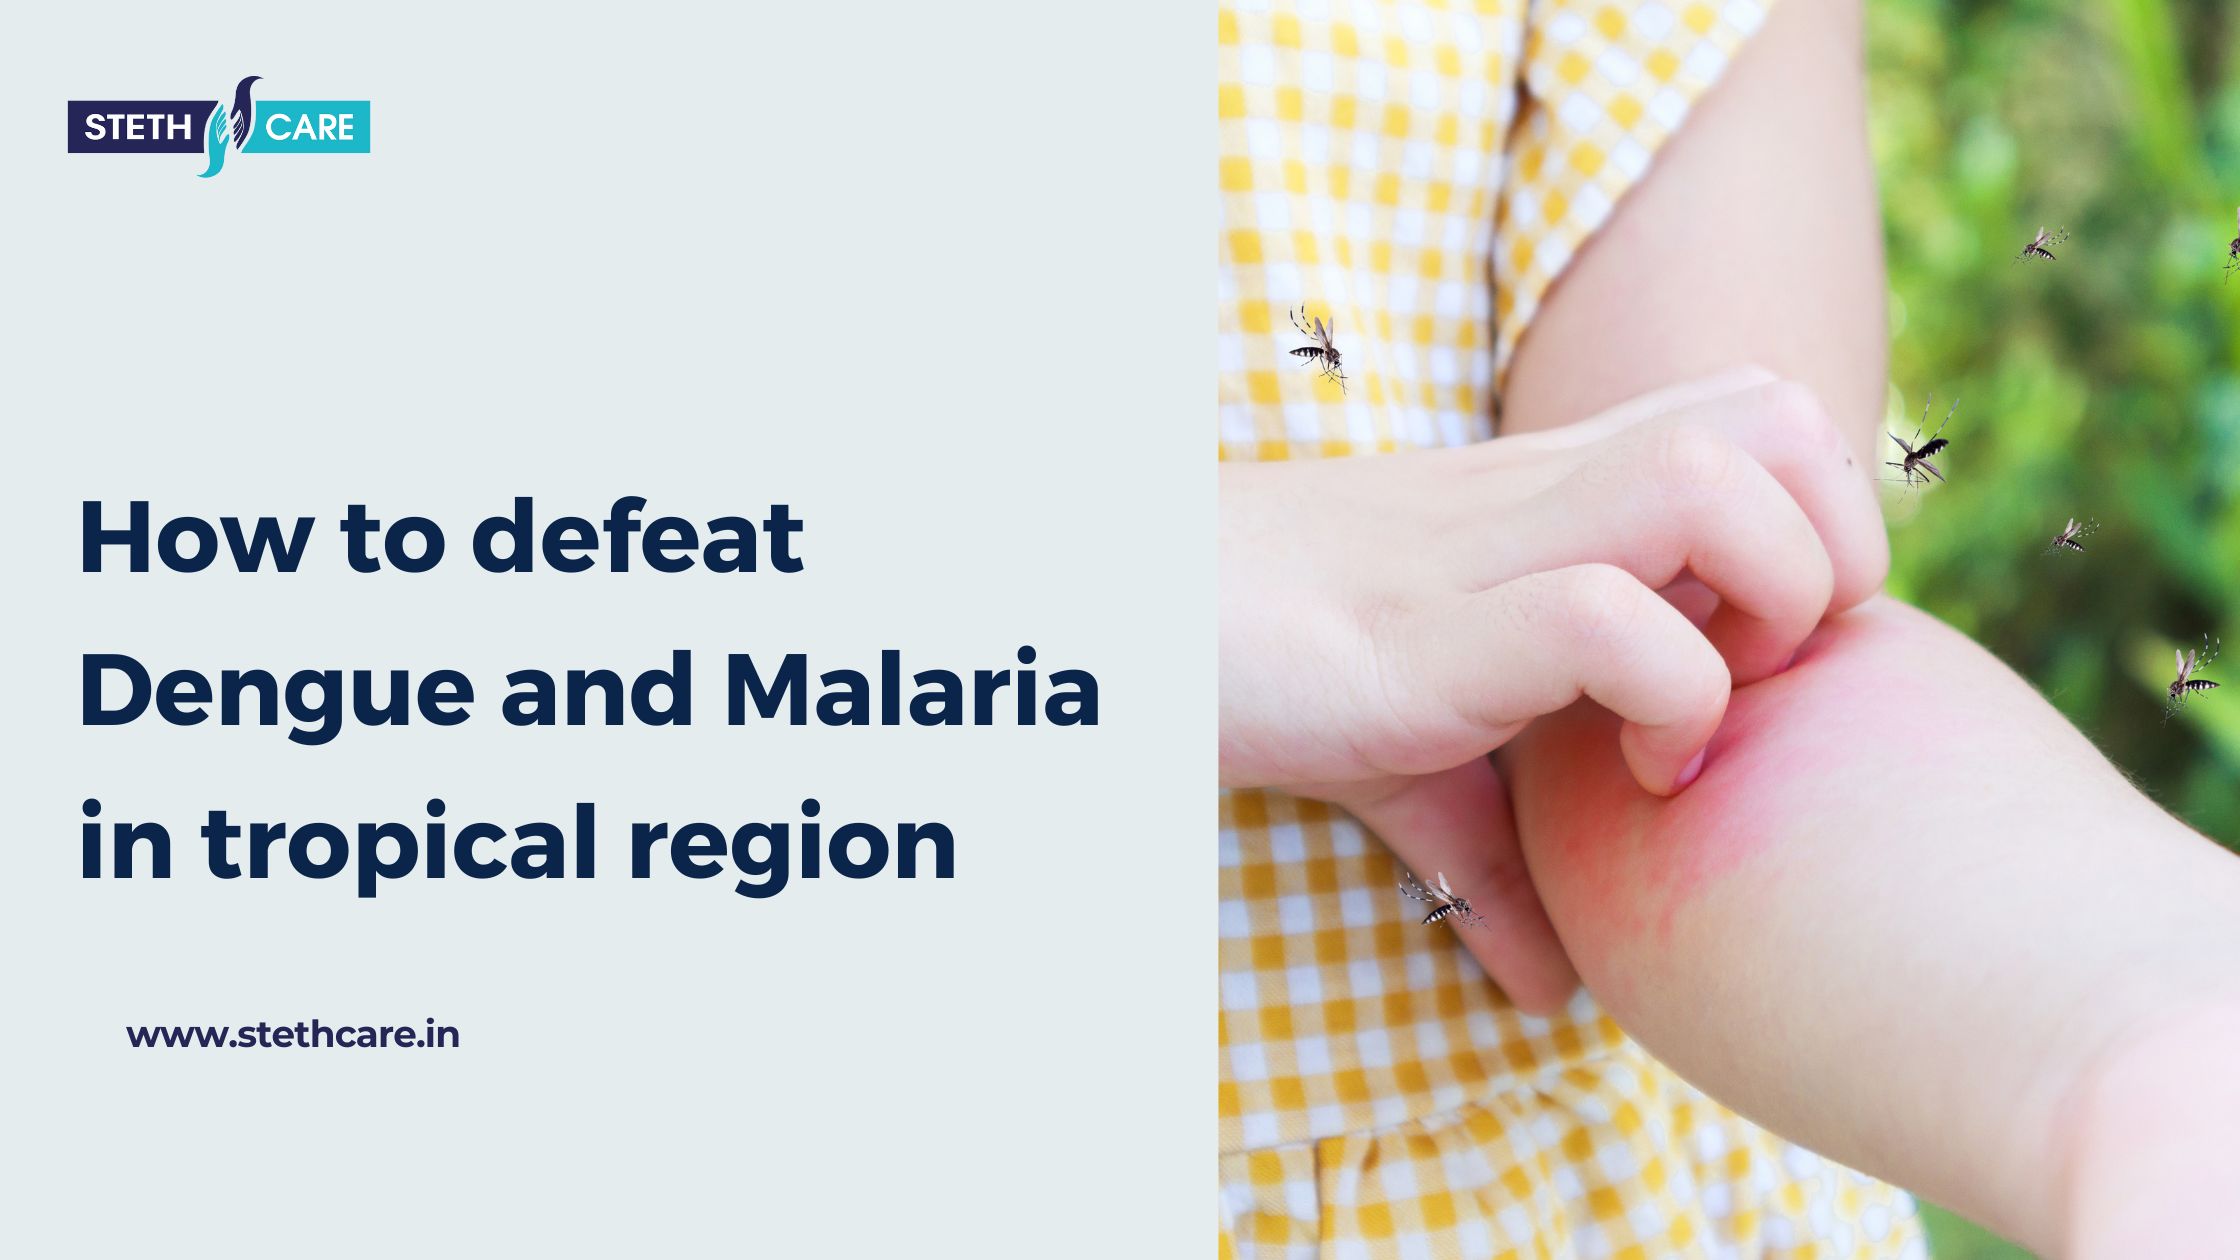 How to defeat Dengue and Malaria in tropical region